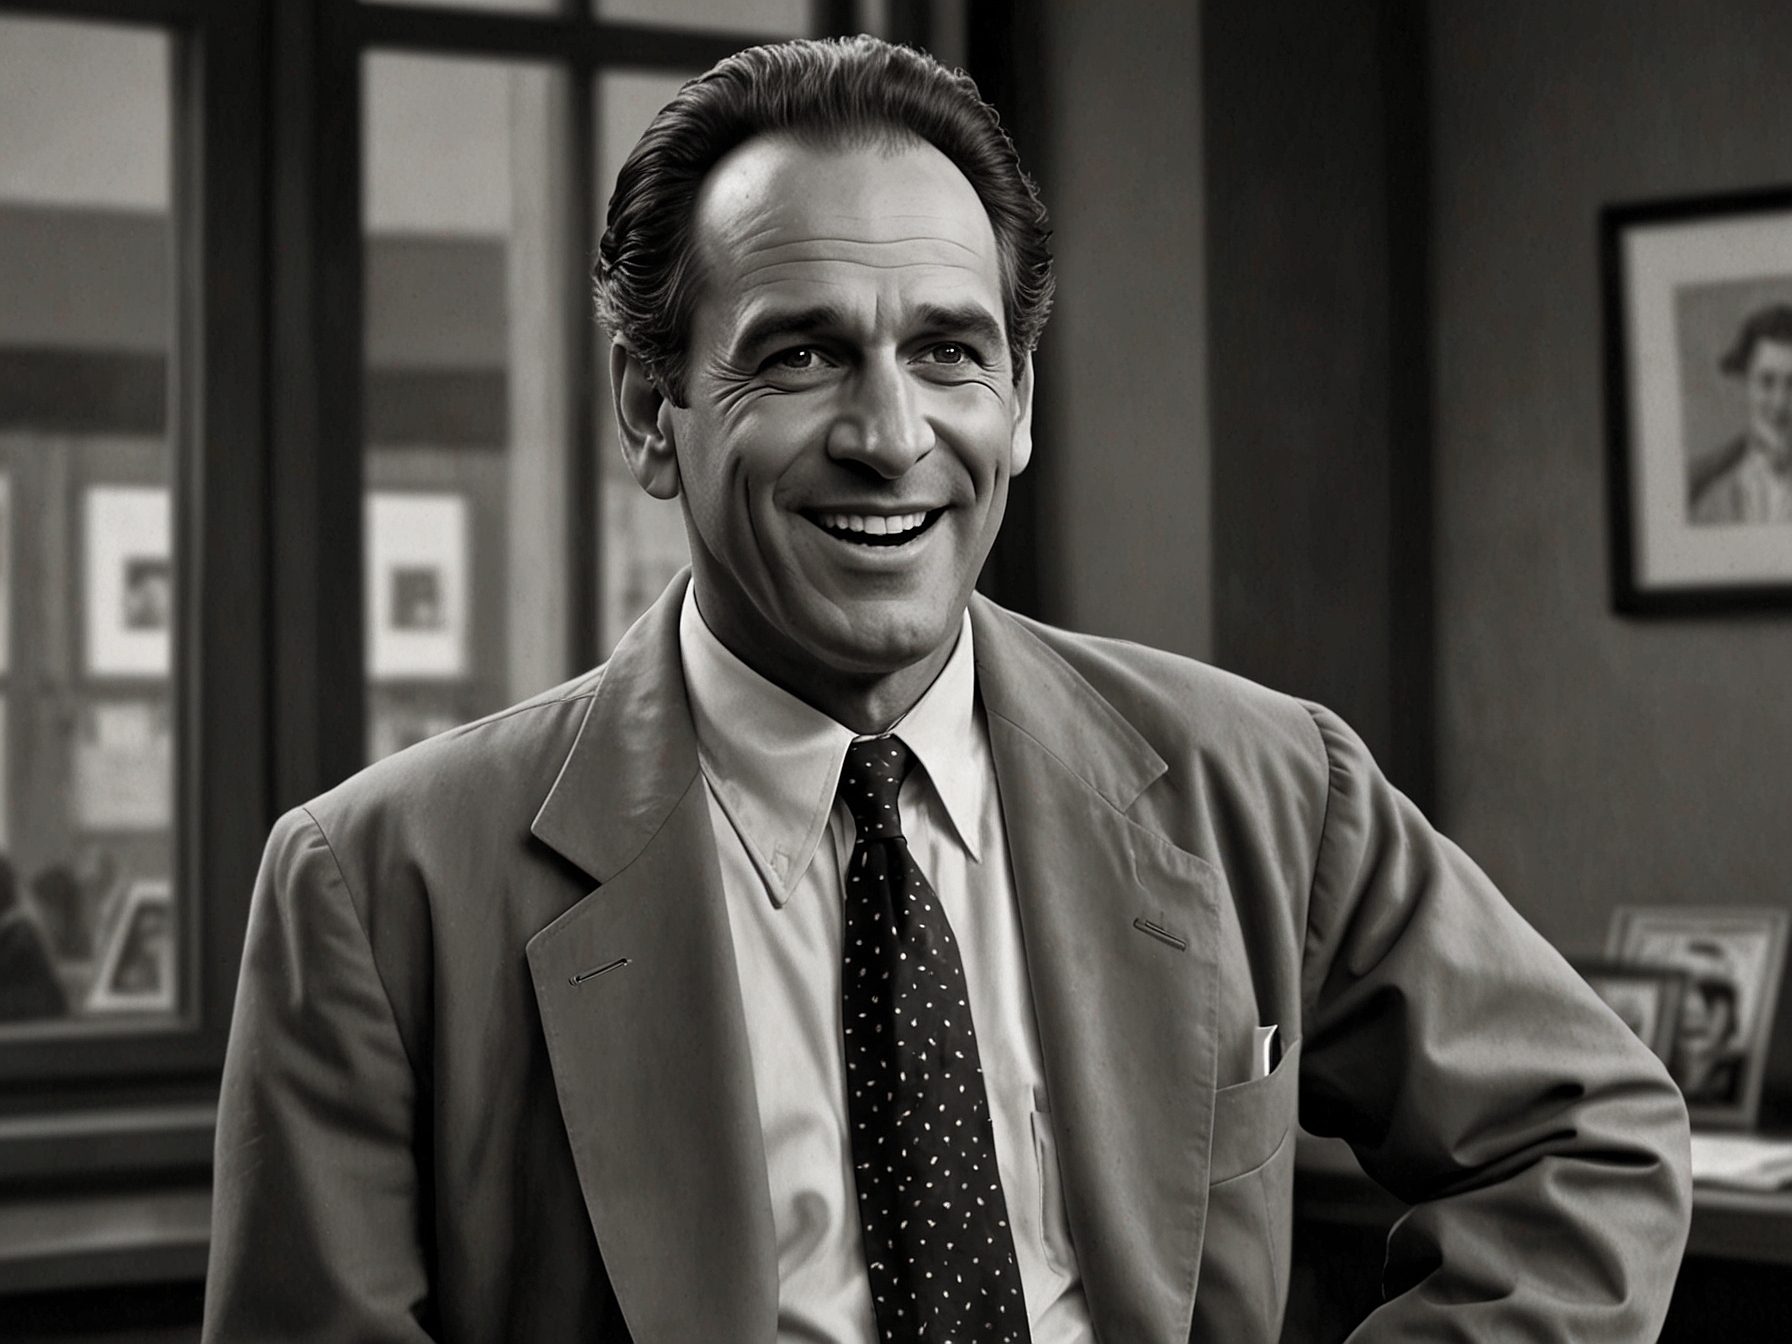 A photo of Hiram Kasten in character during one of his memorable performances on the television series 'Seinfeld'. His expressions capture the humor and charm he brought to the screen.